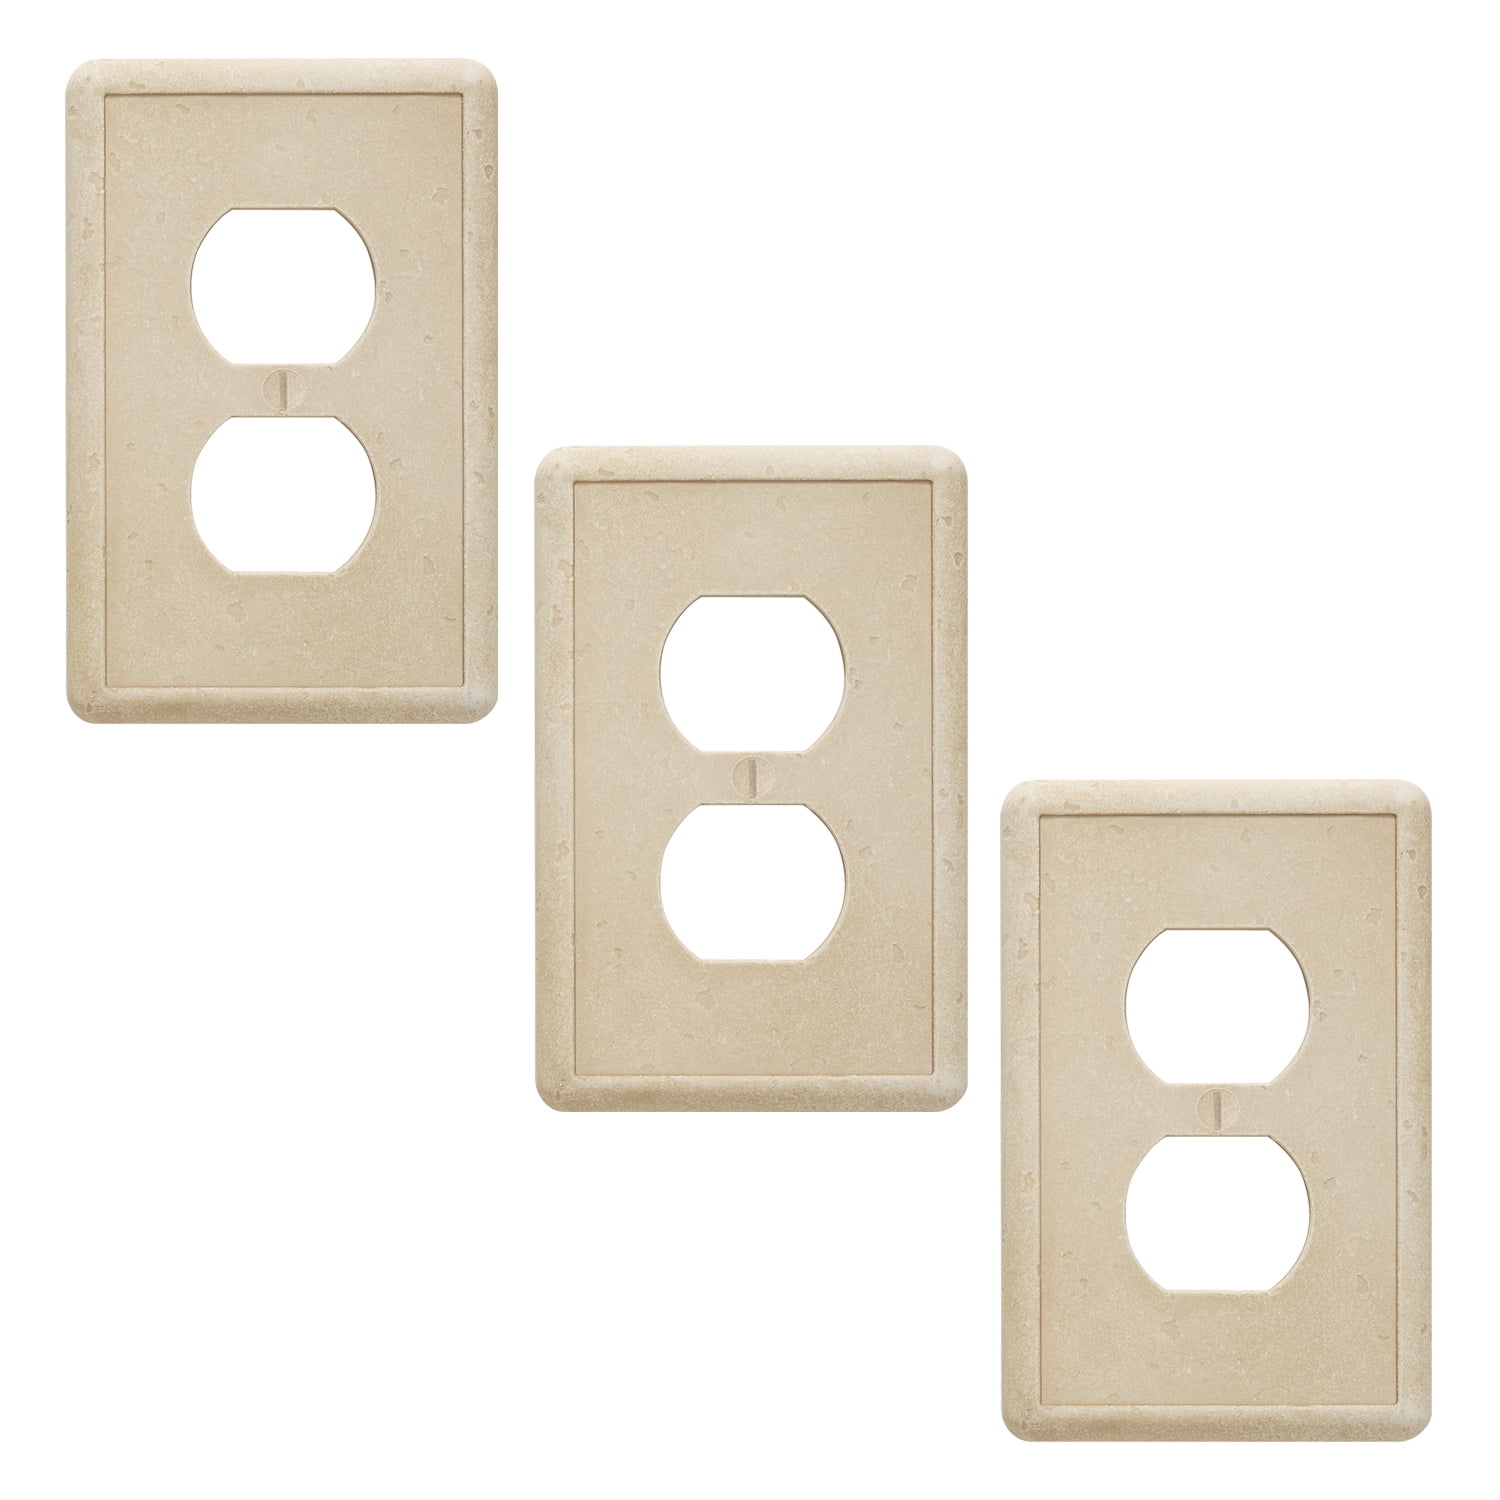 Questech Single Duplex Outlet Cover Linen Textured Decorative Electrical Wall Plate Almond